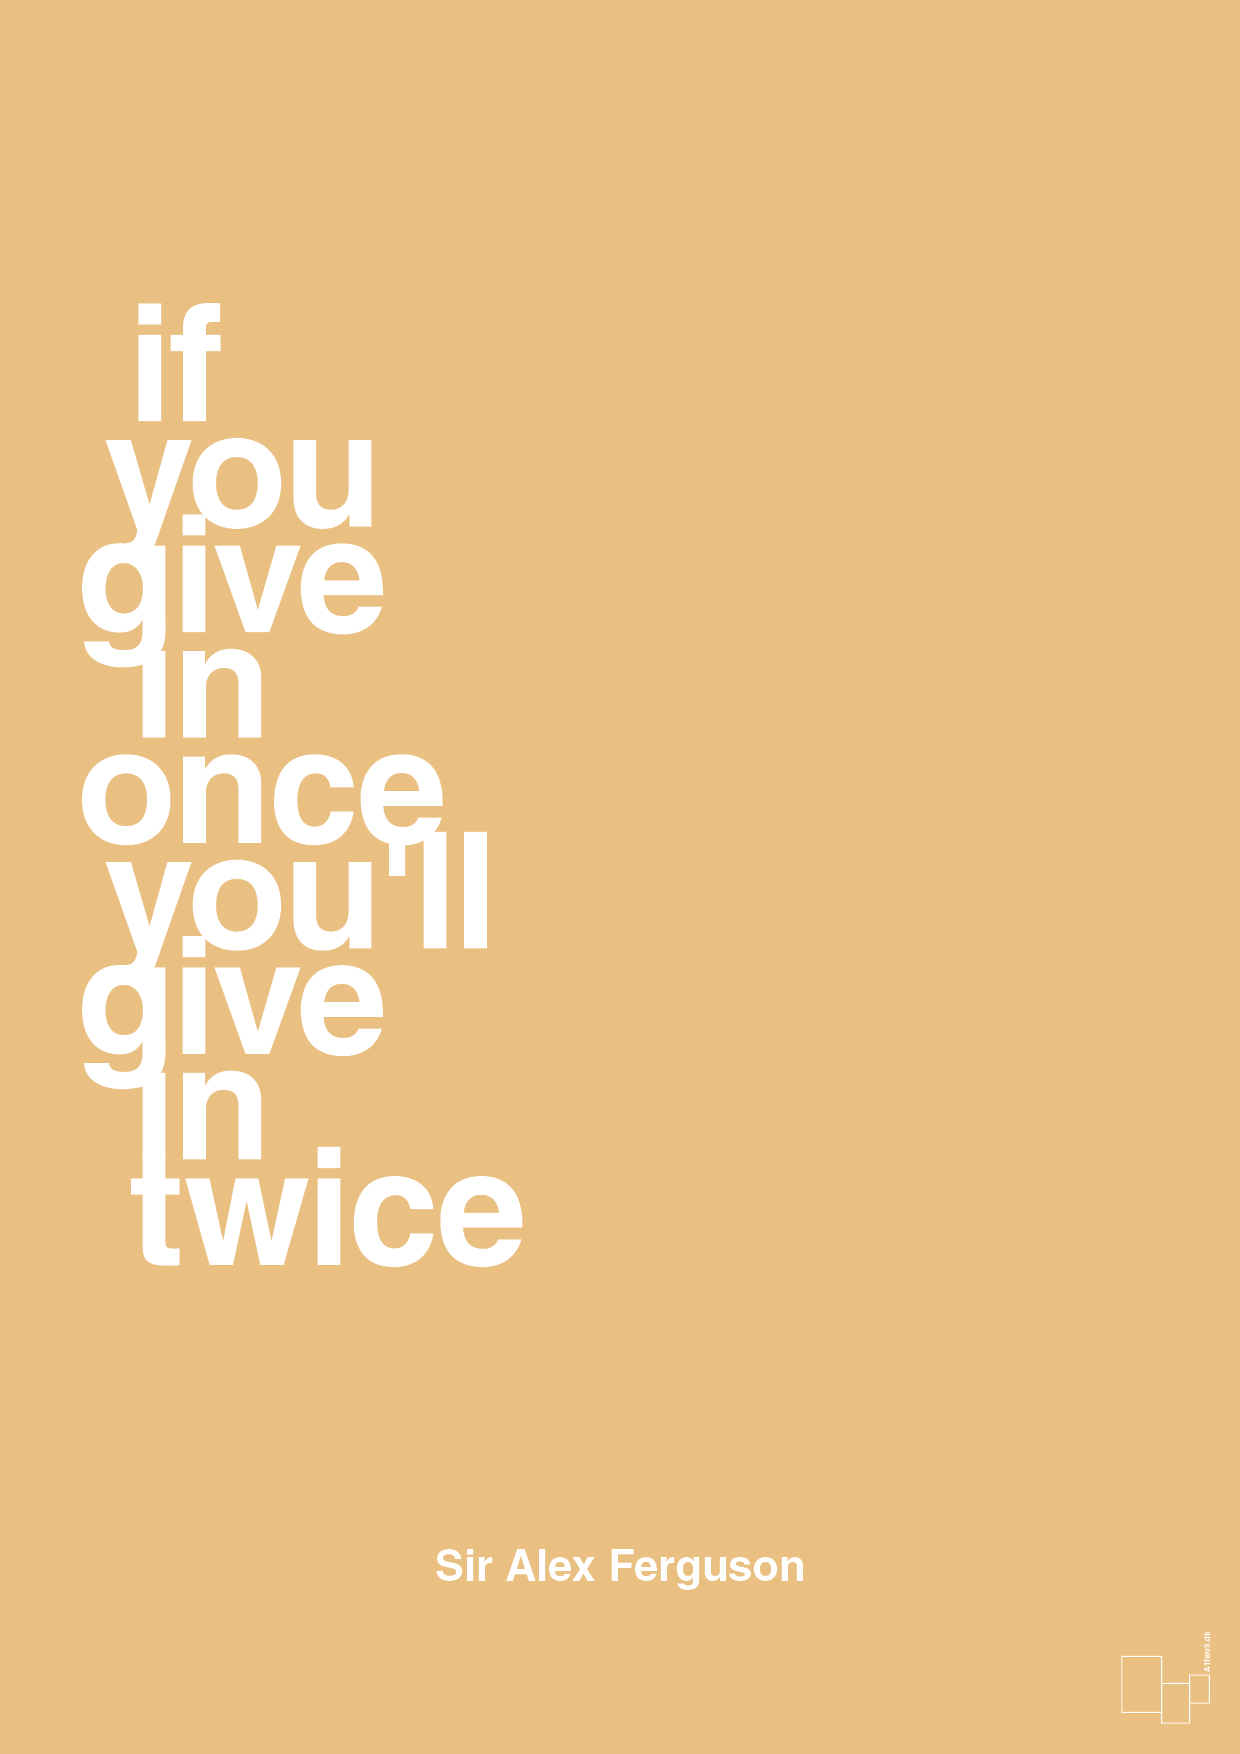 if you give in once you'll give in twice - Plakat med Citater i Charismatic